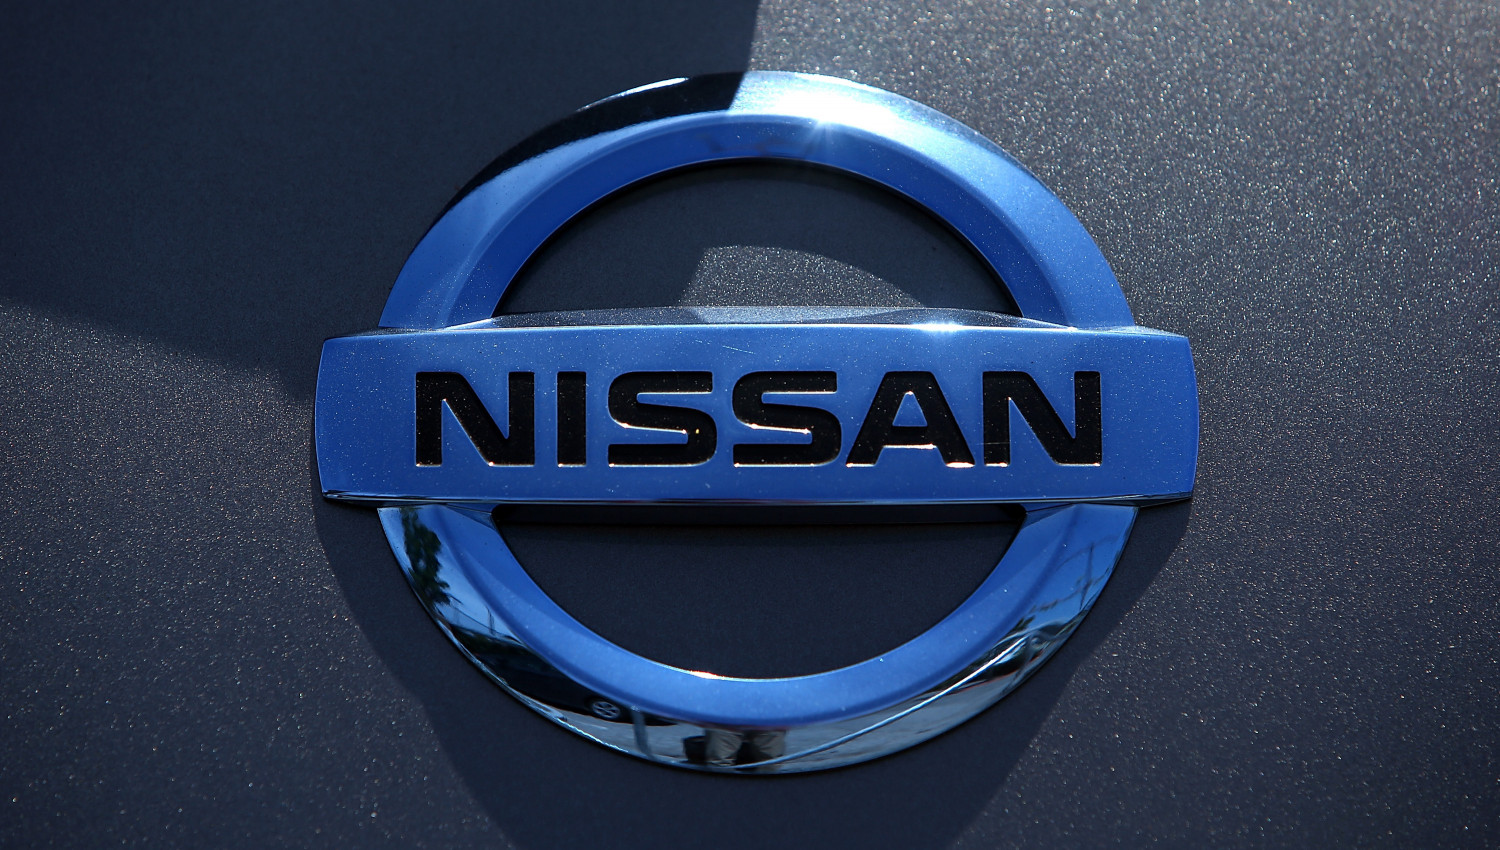 Nissan Recalls Over 250,000 Vehicles to Replace Takata Air Bags